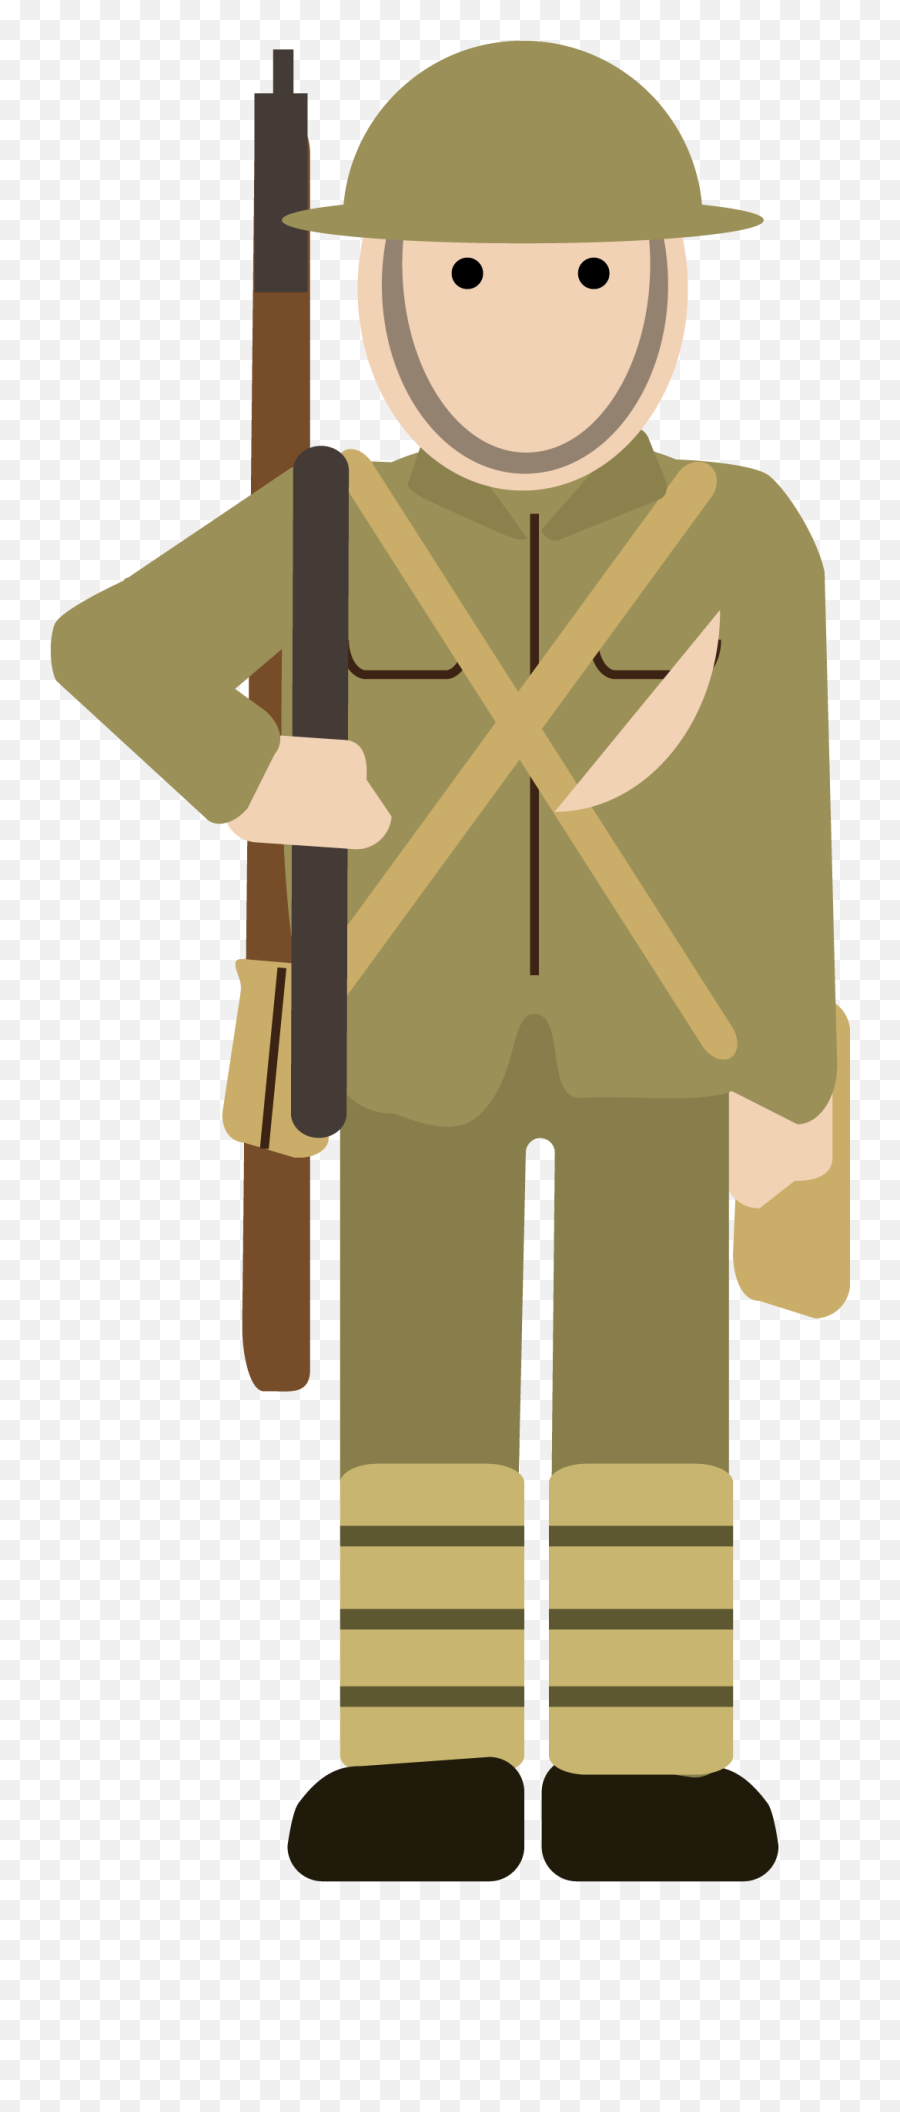 Military Clipart Soldier Ww1 - Cartoon Simple World War 1 Cartoon War Soldier Emoji,Soldier Clipart